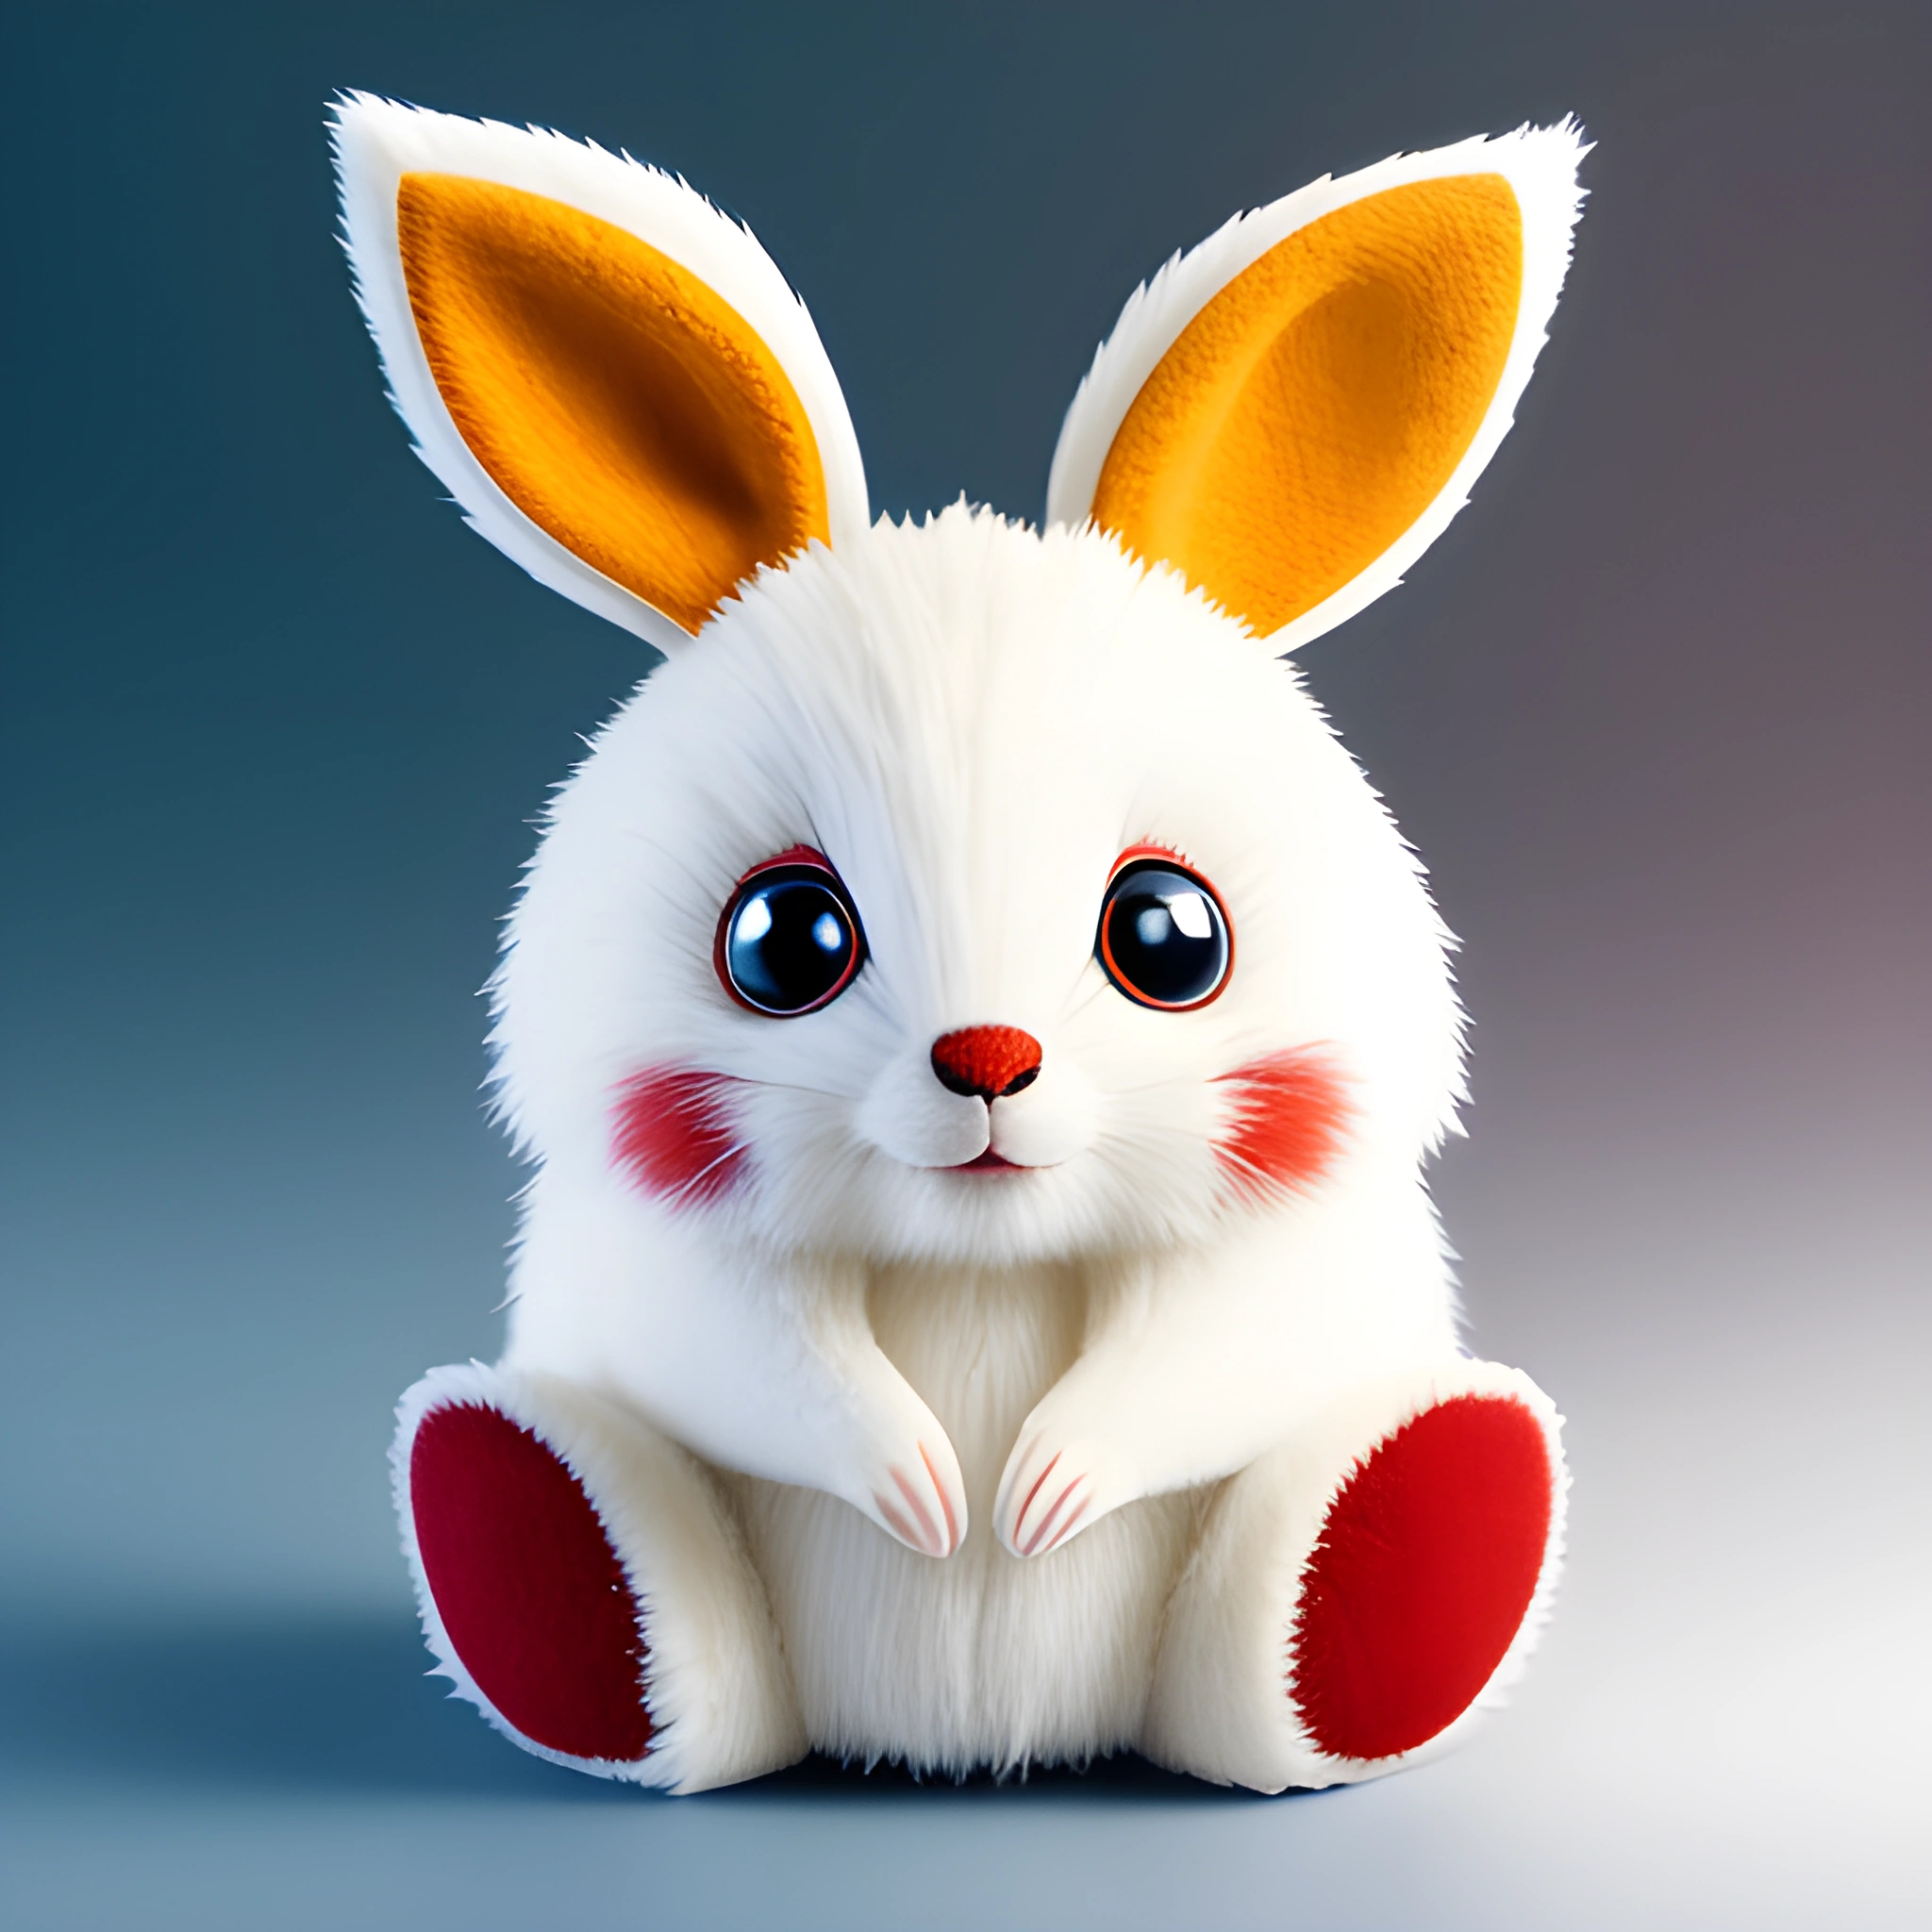 a white rabbit with red feet and ears sitting on a gray surface